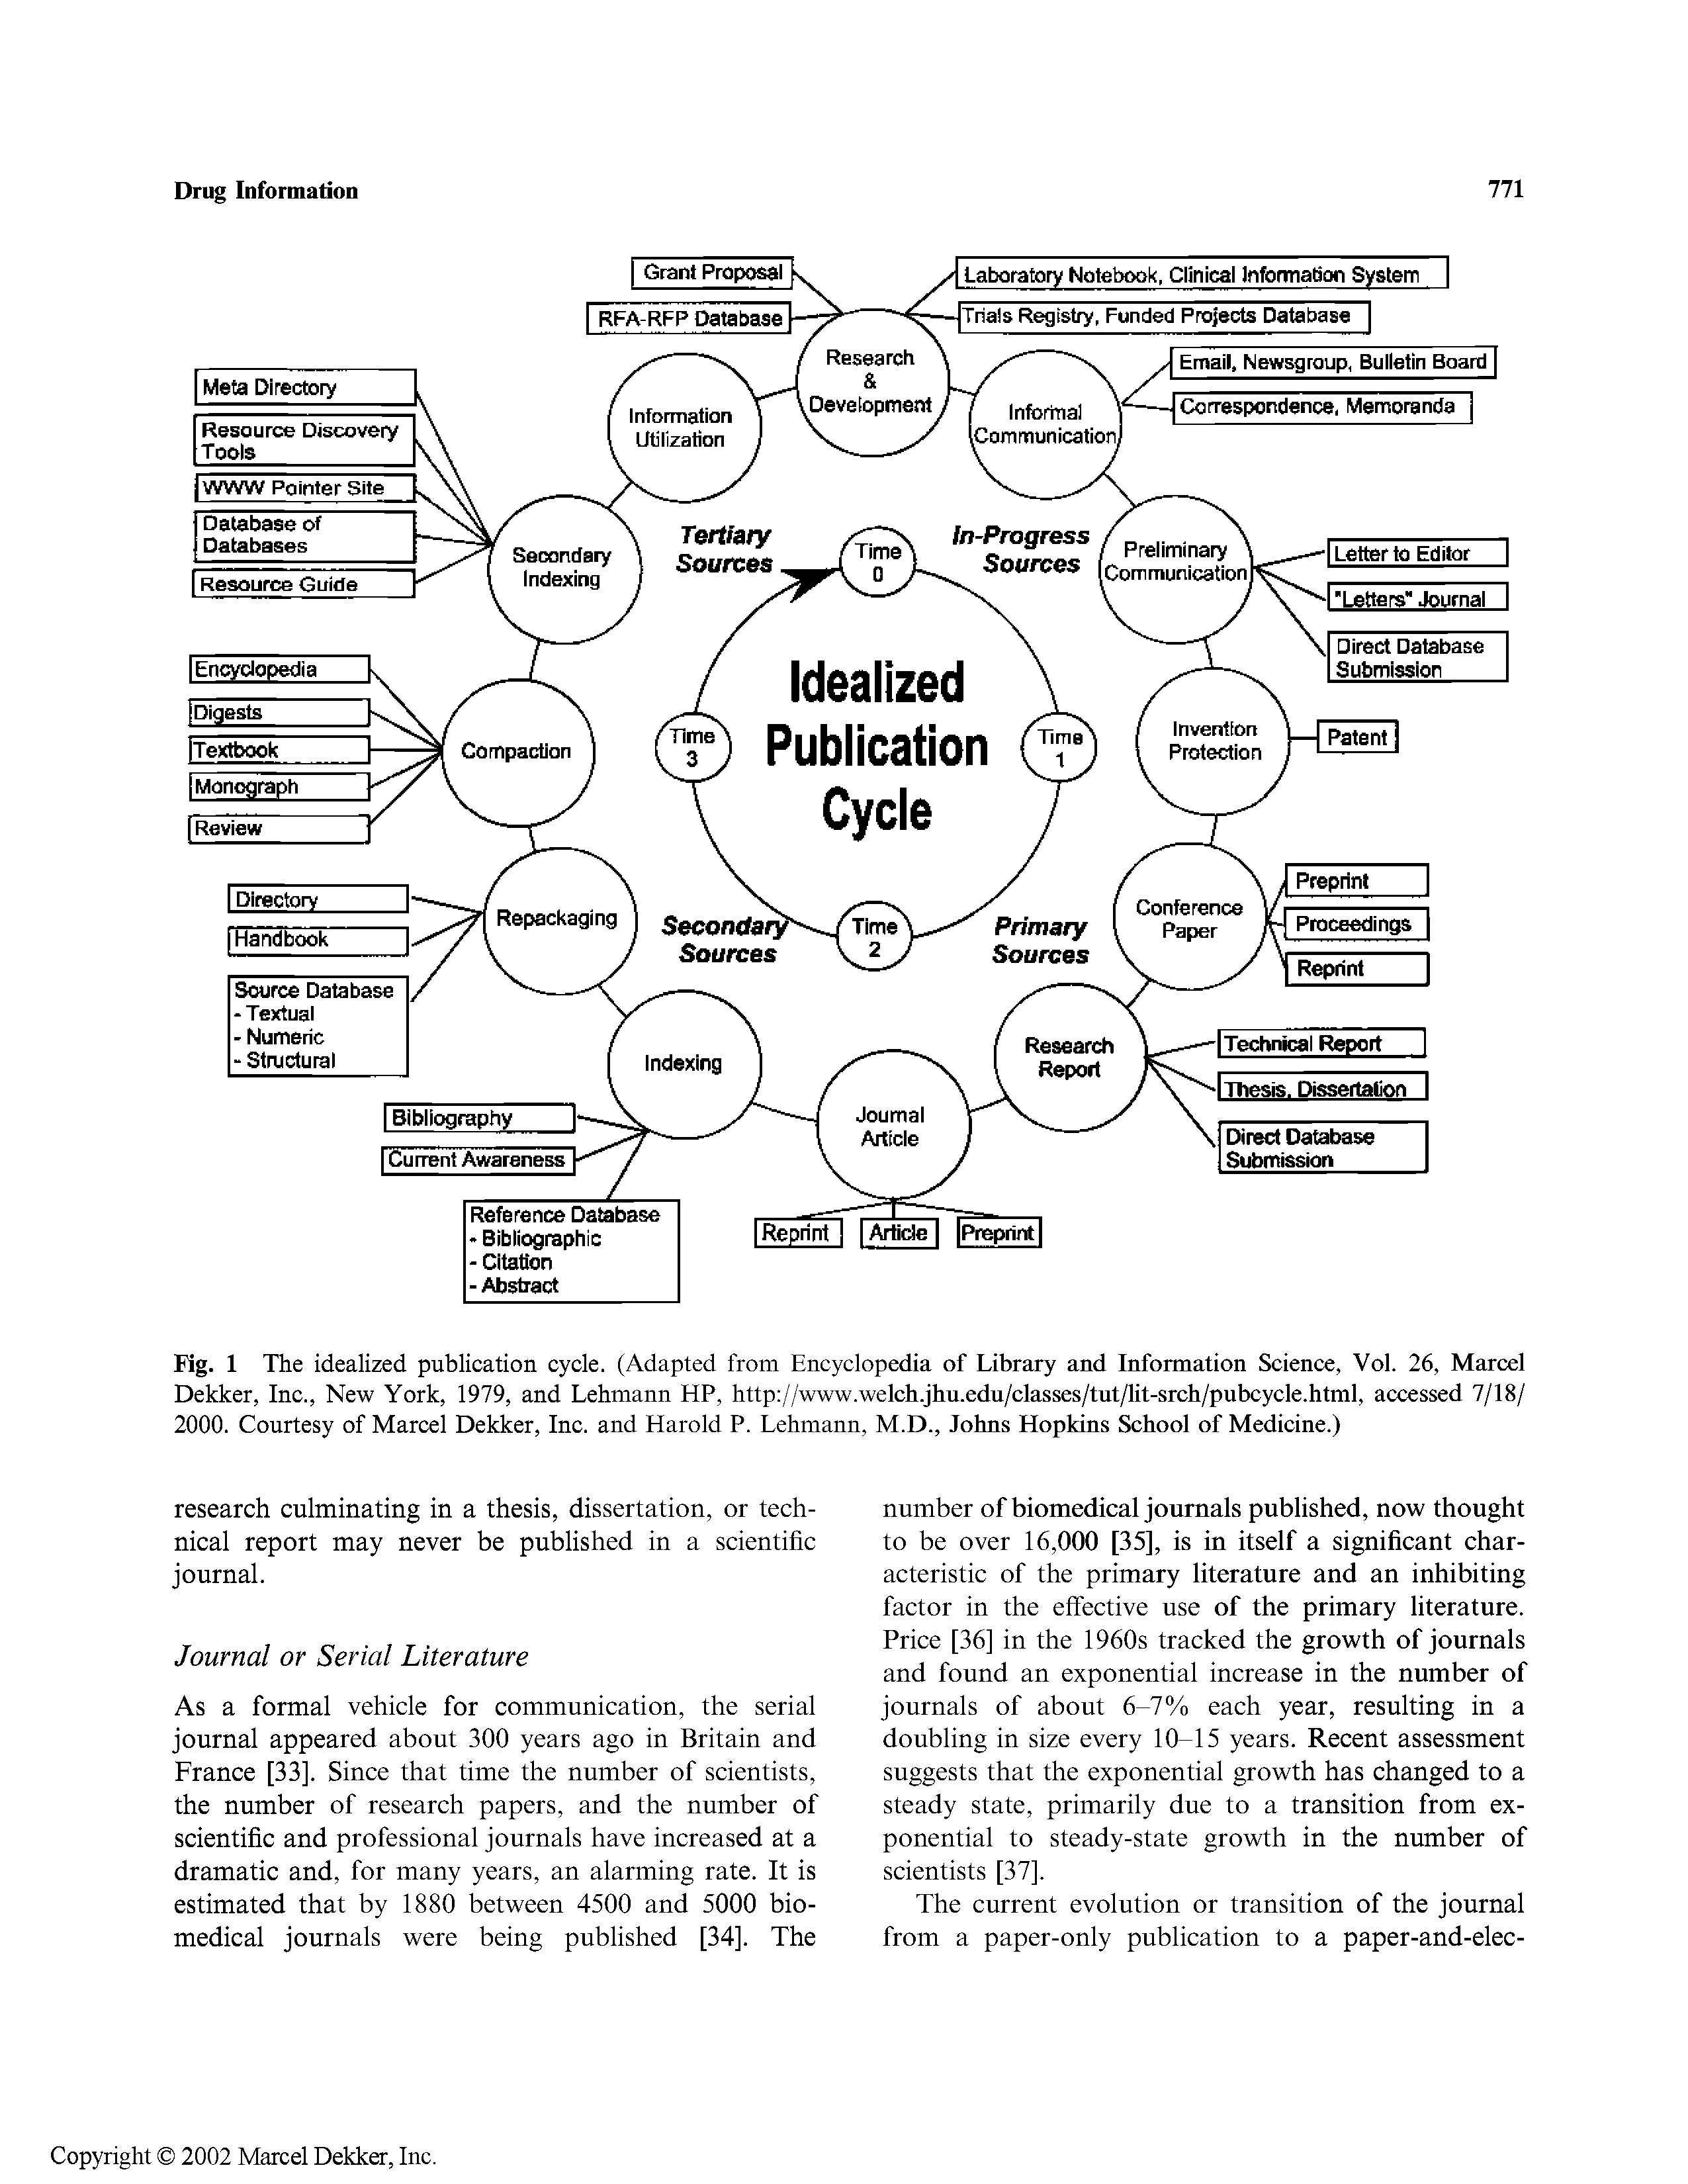 Fig. 1 The idealized publication cycle. (Adapted from Encyclopedia of Library and Information Science, Vol. 26, Marcel Dekker, Inc., New York, 1979, and Lehmann HP, http //www.welch.jhu.edu/classes/tut/lit-srch/pubcycle.html, accessed 7/18/ 2000. Courtesy of Marcel Dekker, Inc. and Harold P. Lehmann, M.D., Johns Hopkins School of Medicine.)...